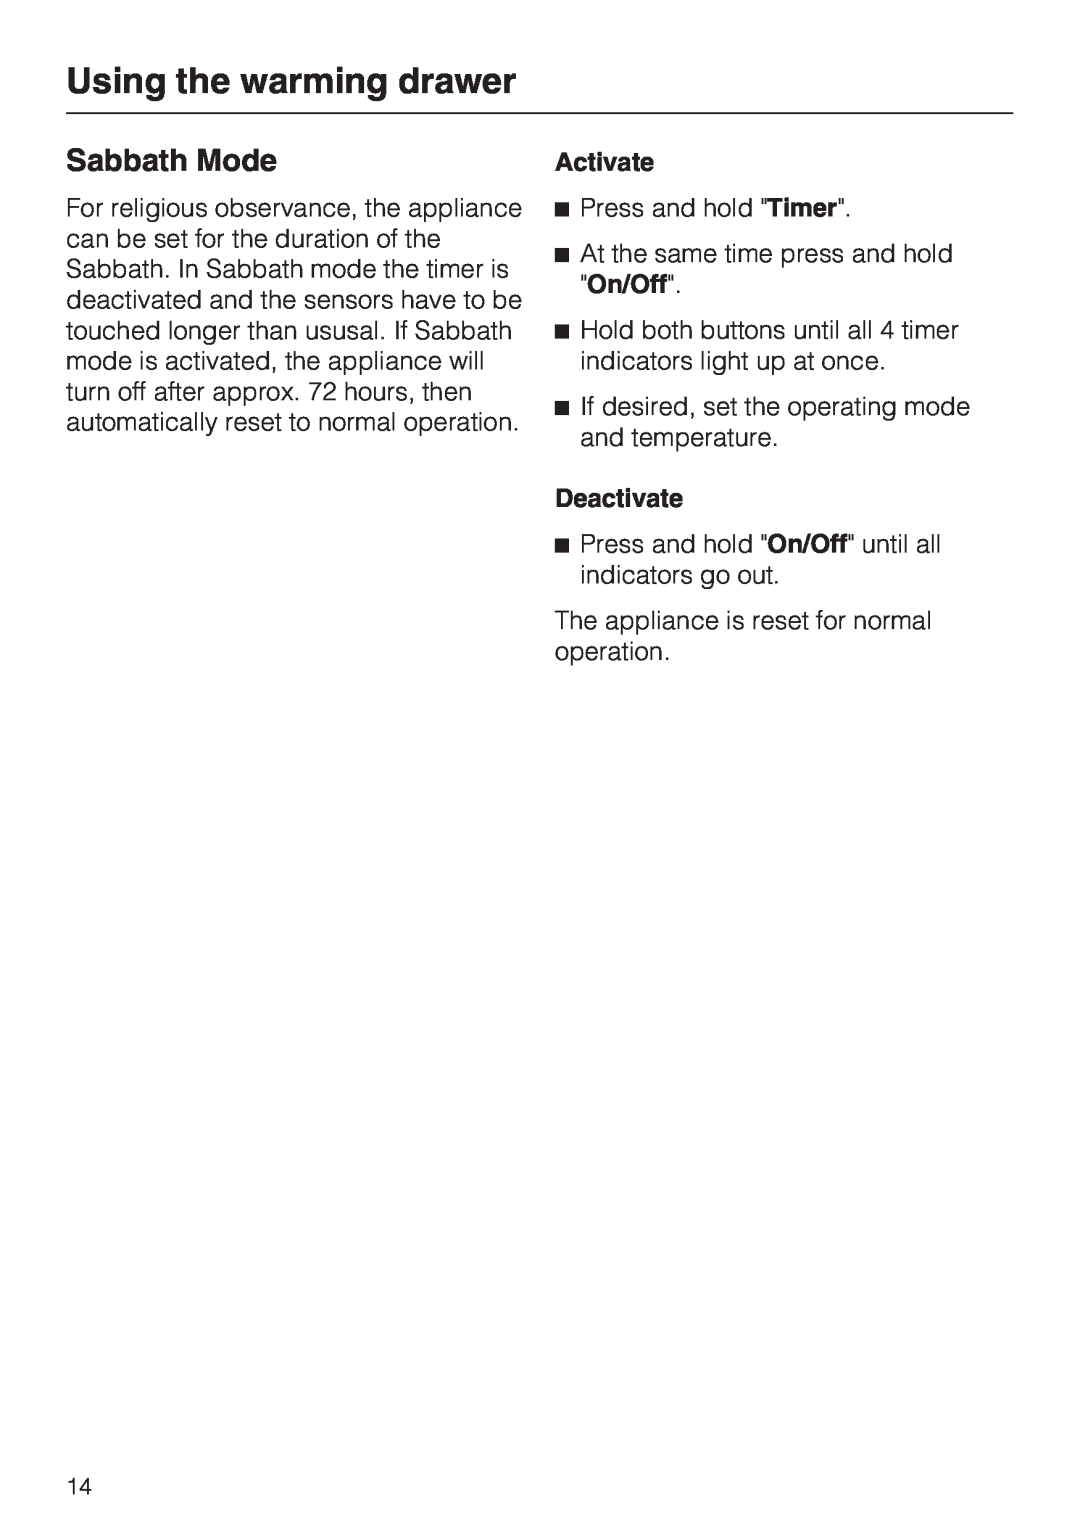 Miele ESW48XX, ESW 408X-14 installation instructions Sabbath Mode, Activate, Deactivate, Using the warming drawer 